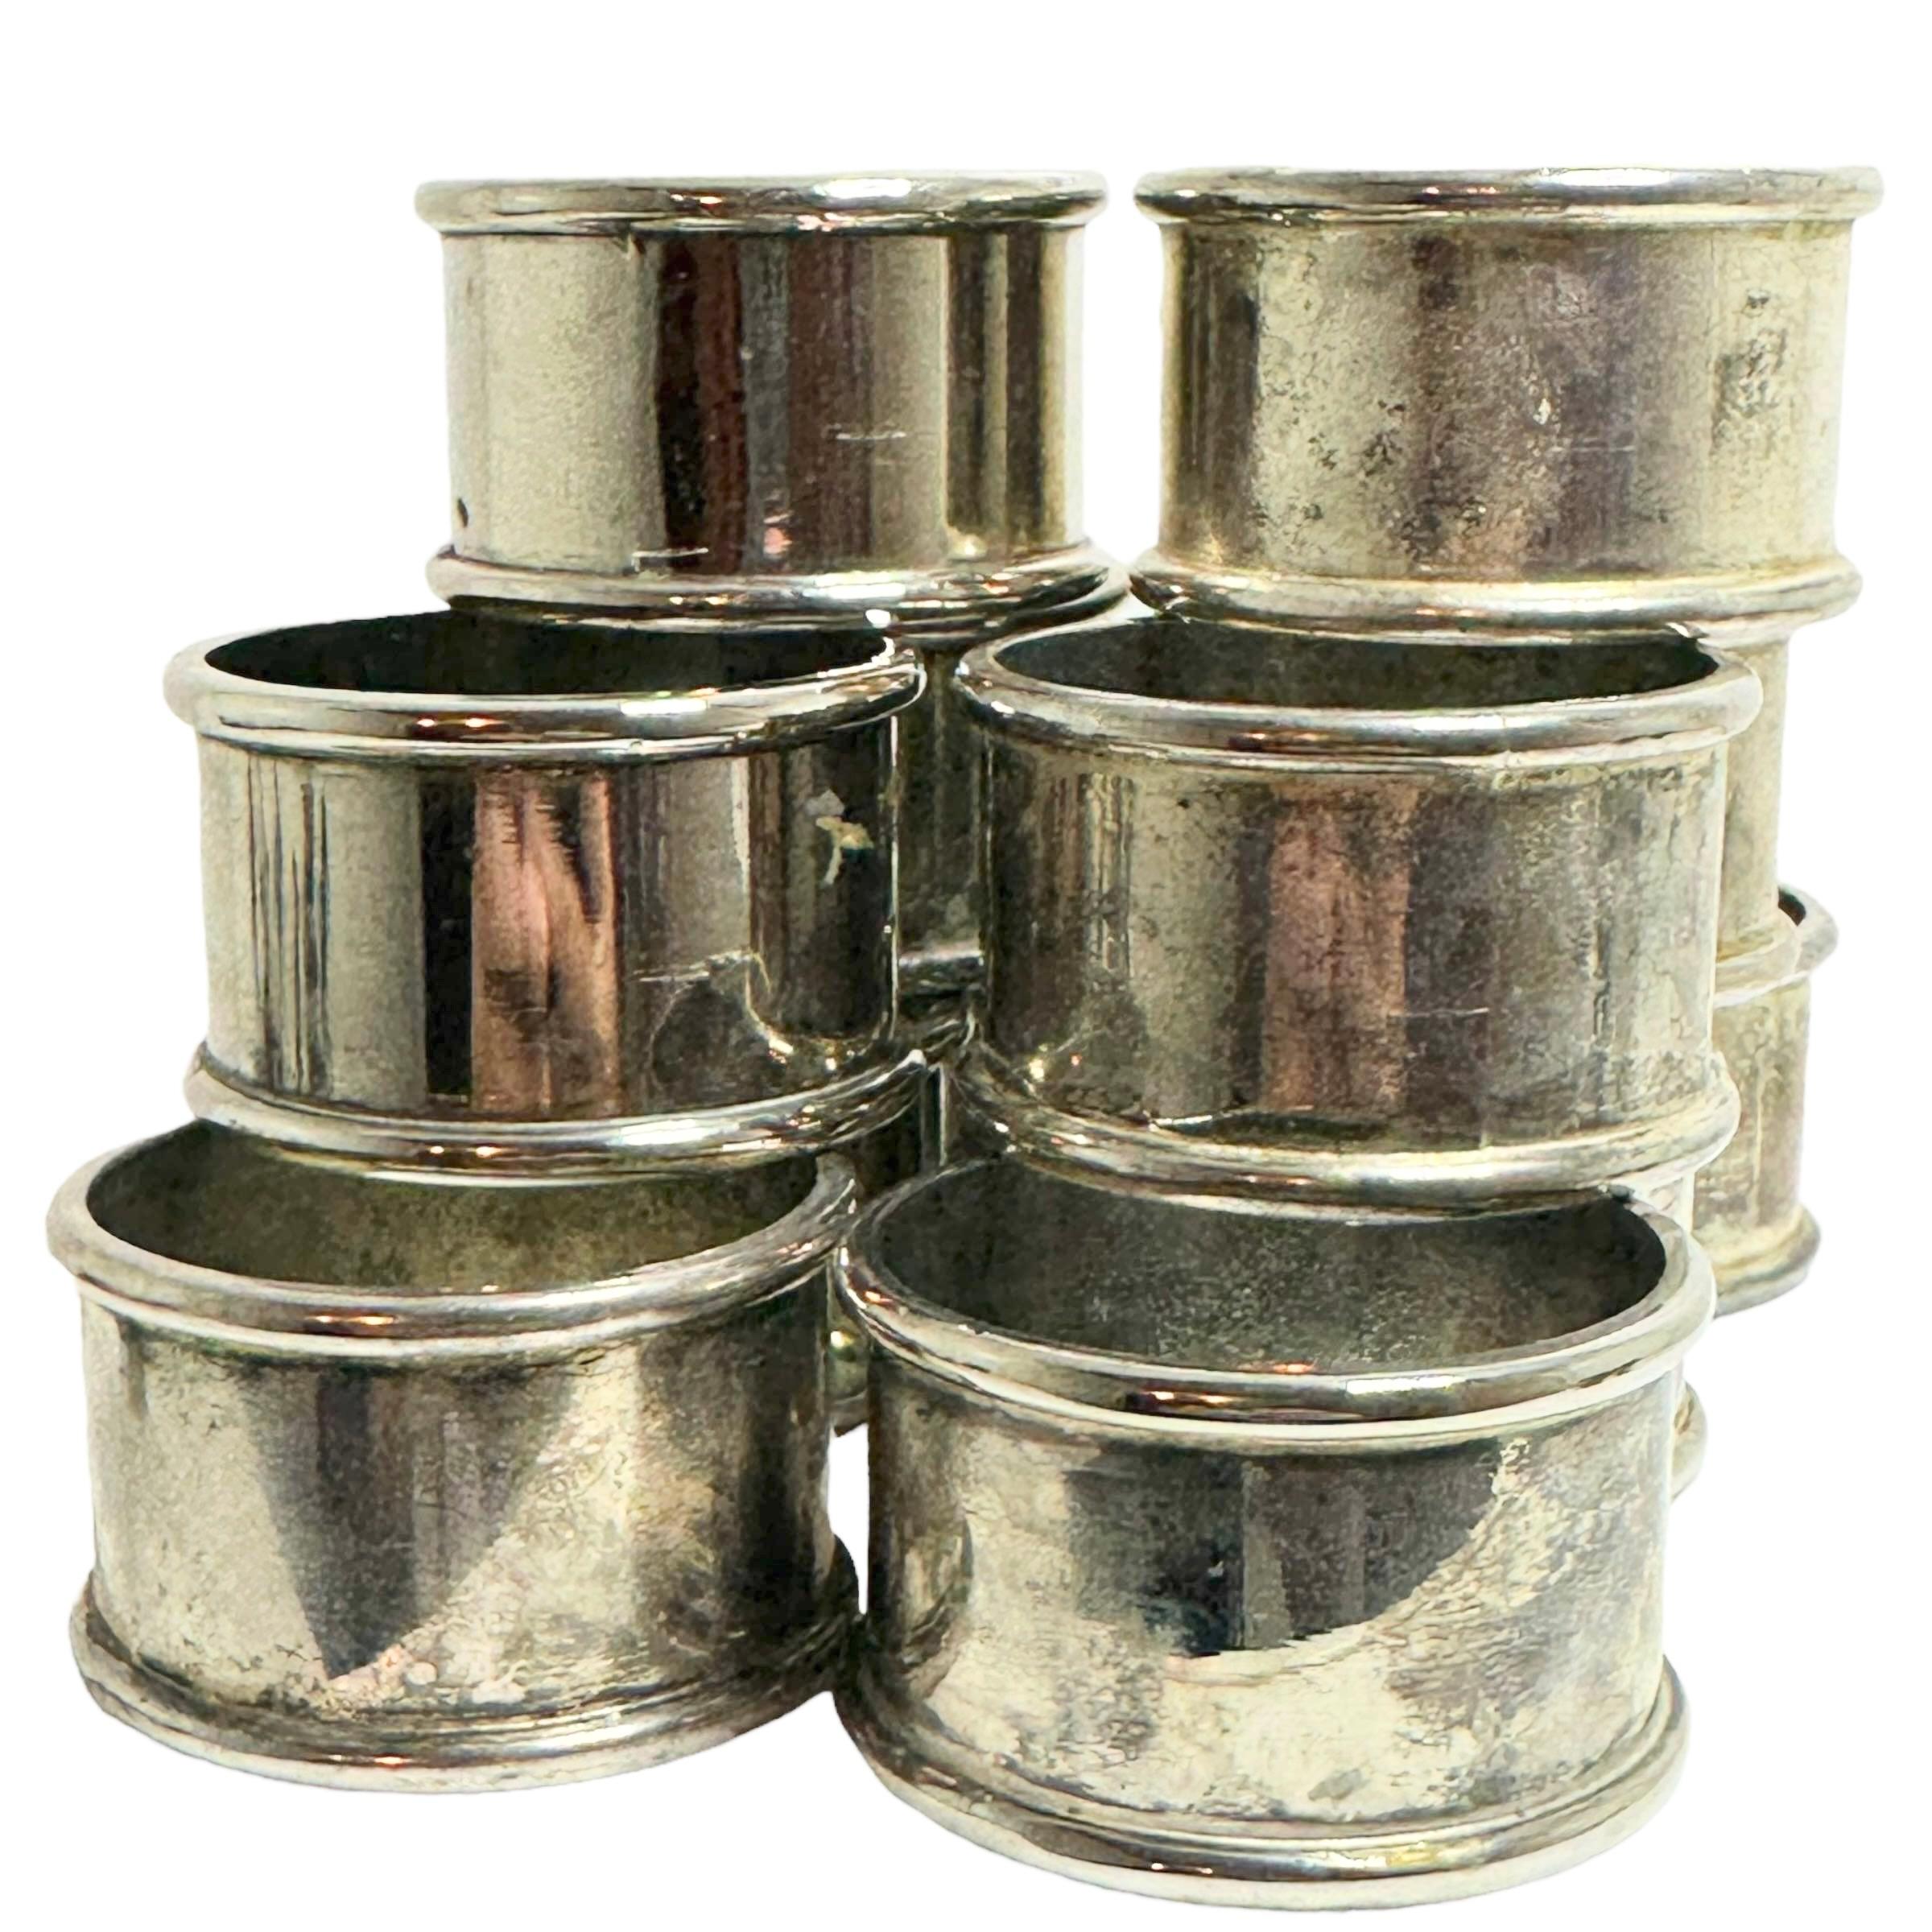 A set of twelve silver plated napkin rings, circa 1910-1930s, attributed to WMF. A nice set of round rings, from the Art Nouveau era. All of them with a nice patina. Can be cleaned from the new owner, but also give the table a classic statement when